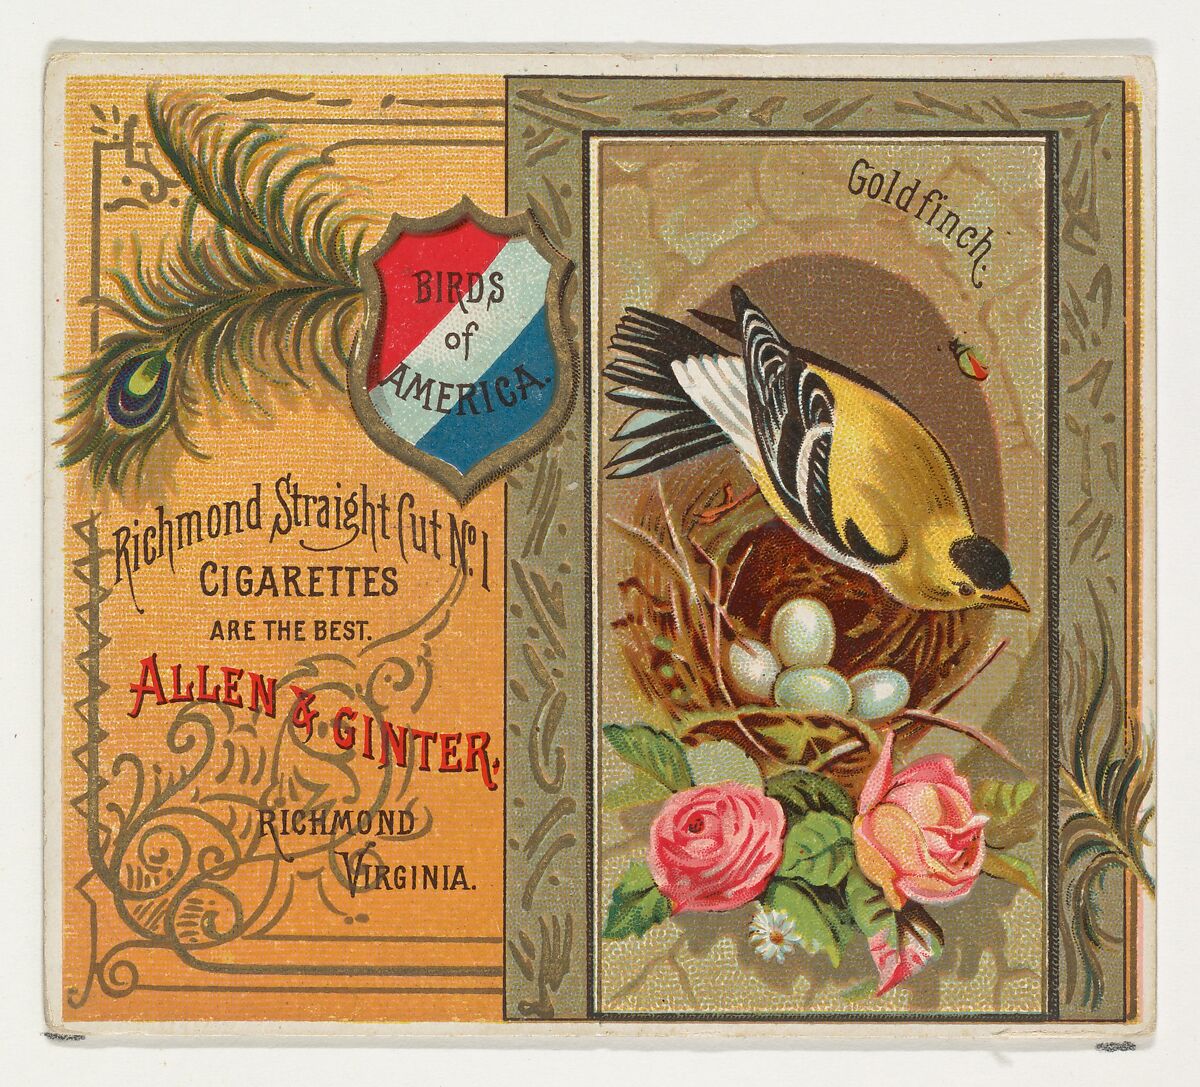 Goldfinch, from the Birds of America series (N37) for Allen & Ginter Cigarettes, Issued by Allen &amp; Ginter (American, Richmond, Virginia), Commercial color lithograph 